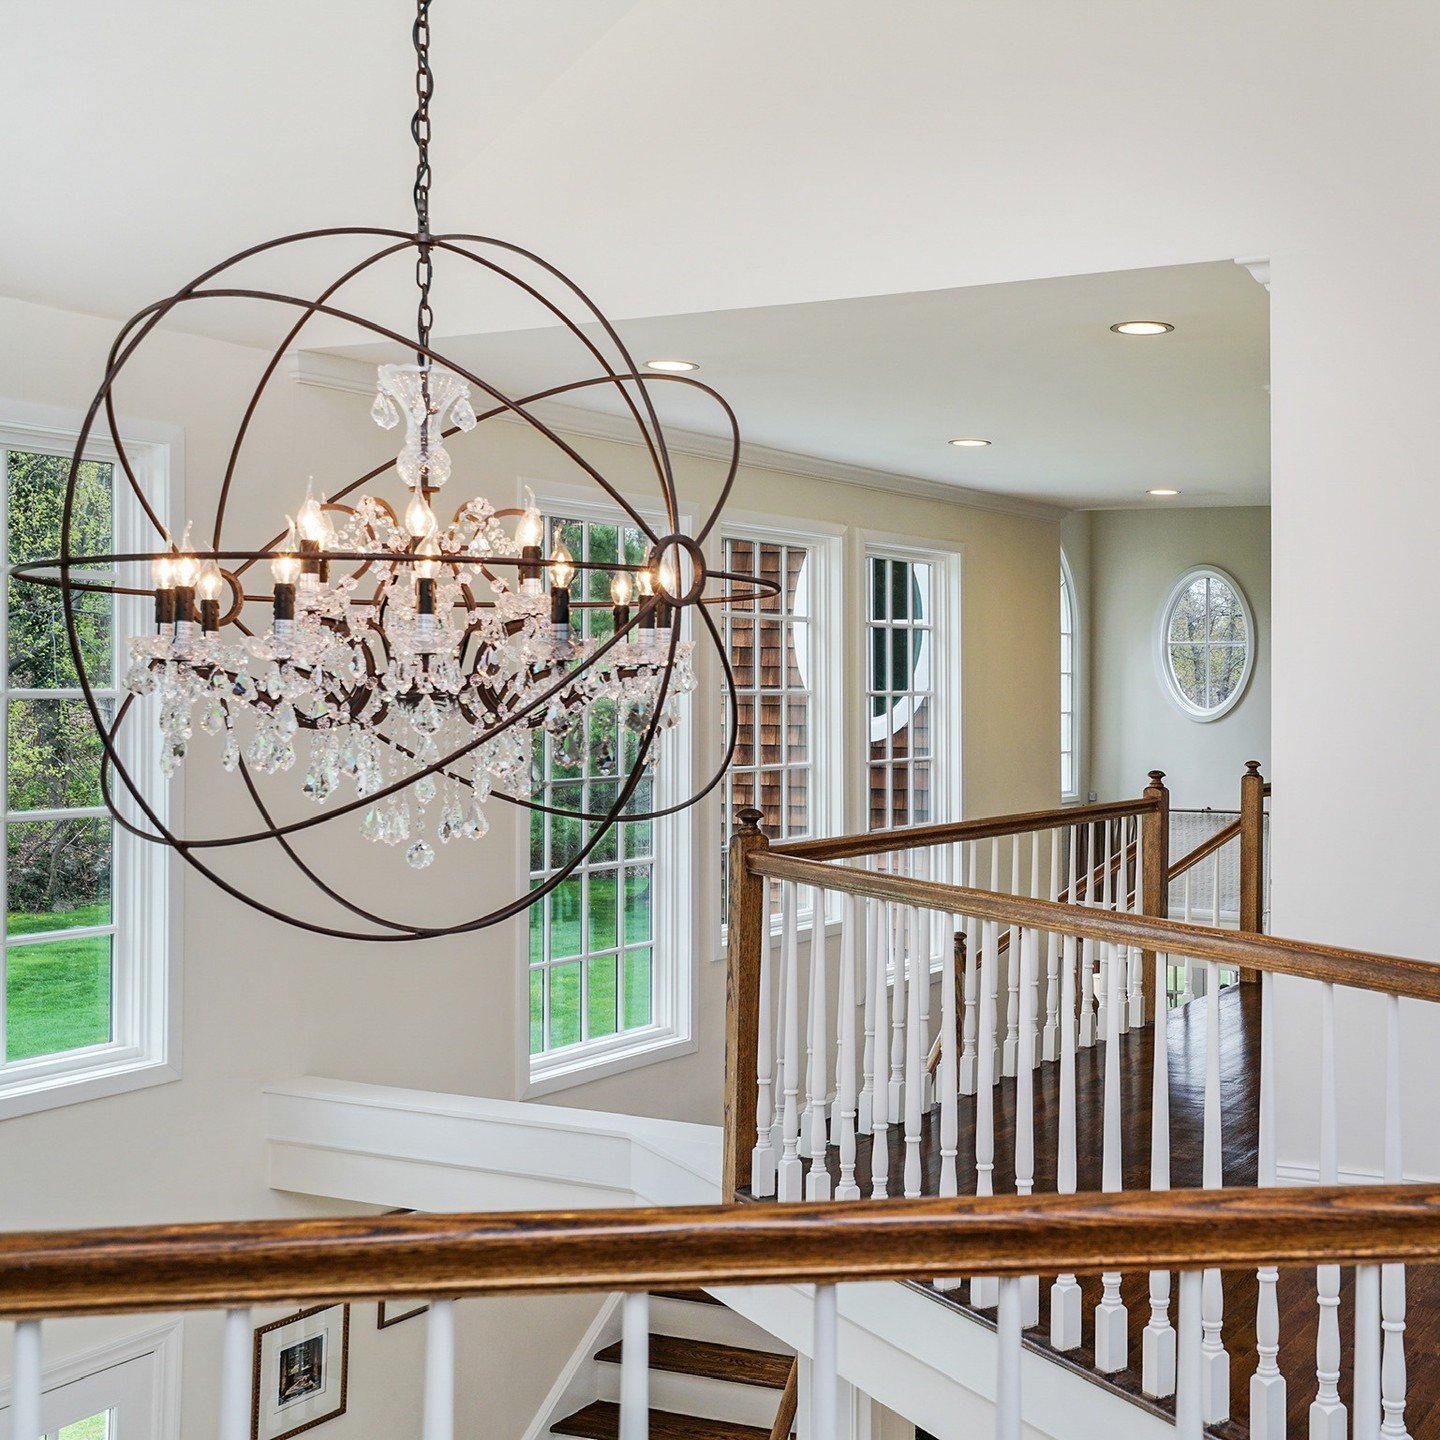 From the majestic chandelier casting a warm glow over the foyer to the grand living room with its rich wooden floors and a cozy fireplace, every corner of this home invites you to relax in style. 

📍 6 Lakeside Drive

Every detail, beautifully captu